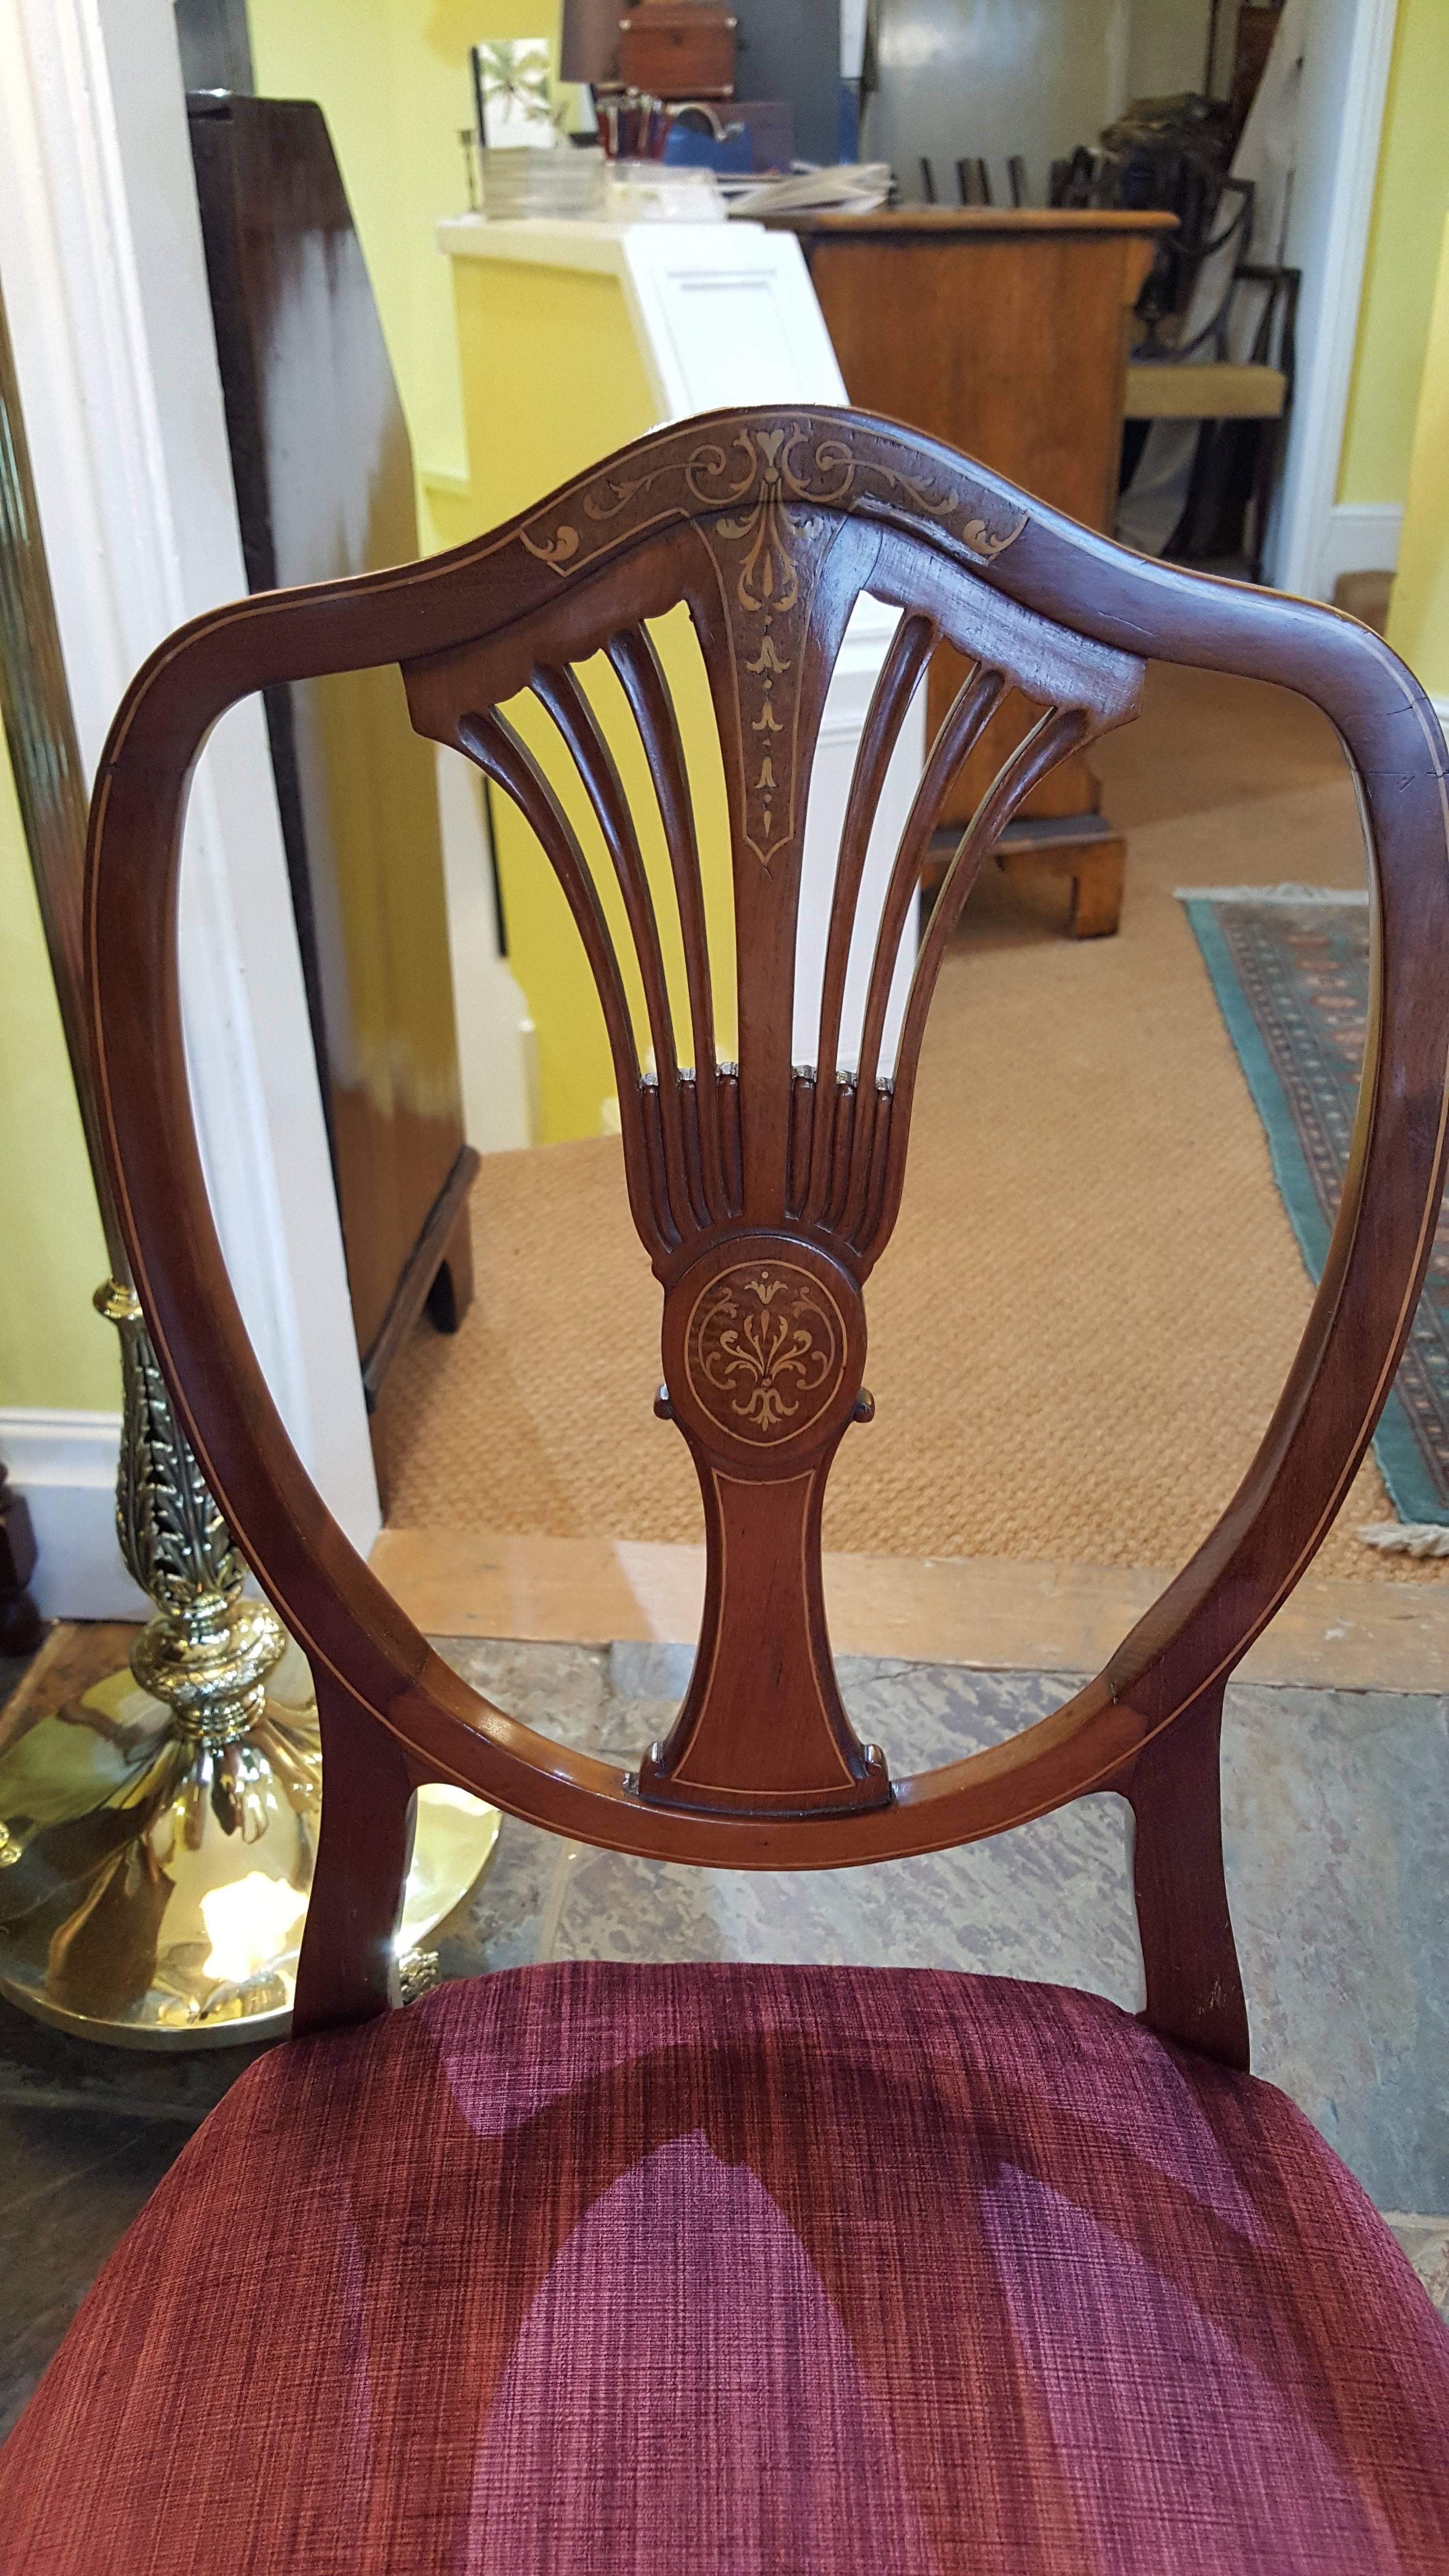 Pair of Edwardian mahogany and marquetry chairs with turned and line inlaid legs
Measures: 18